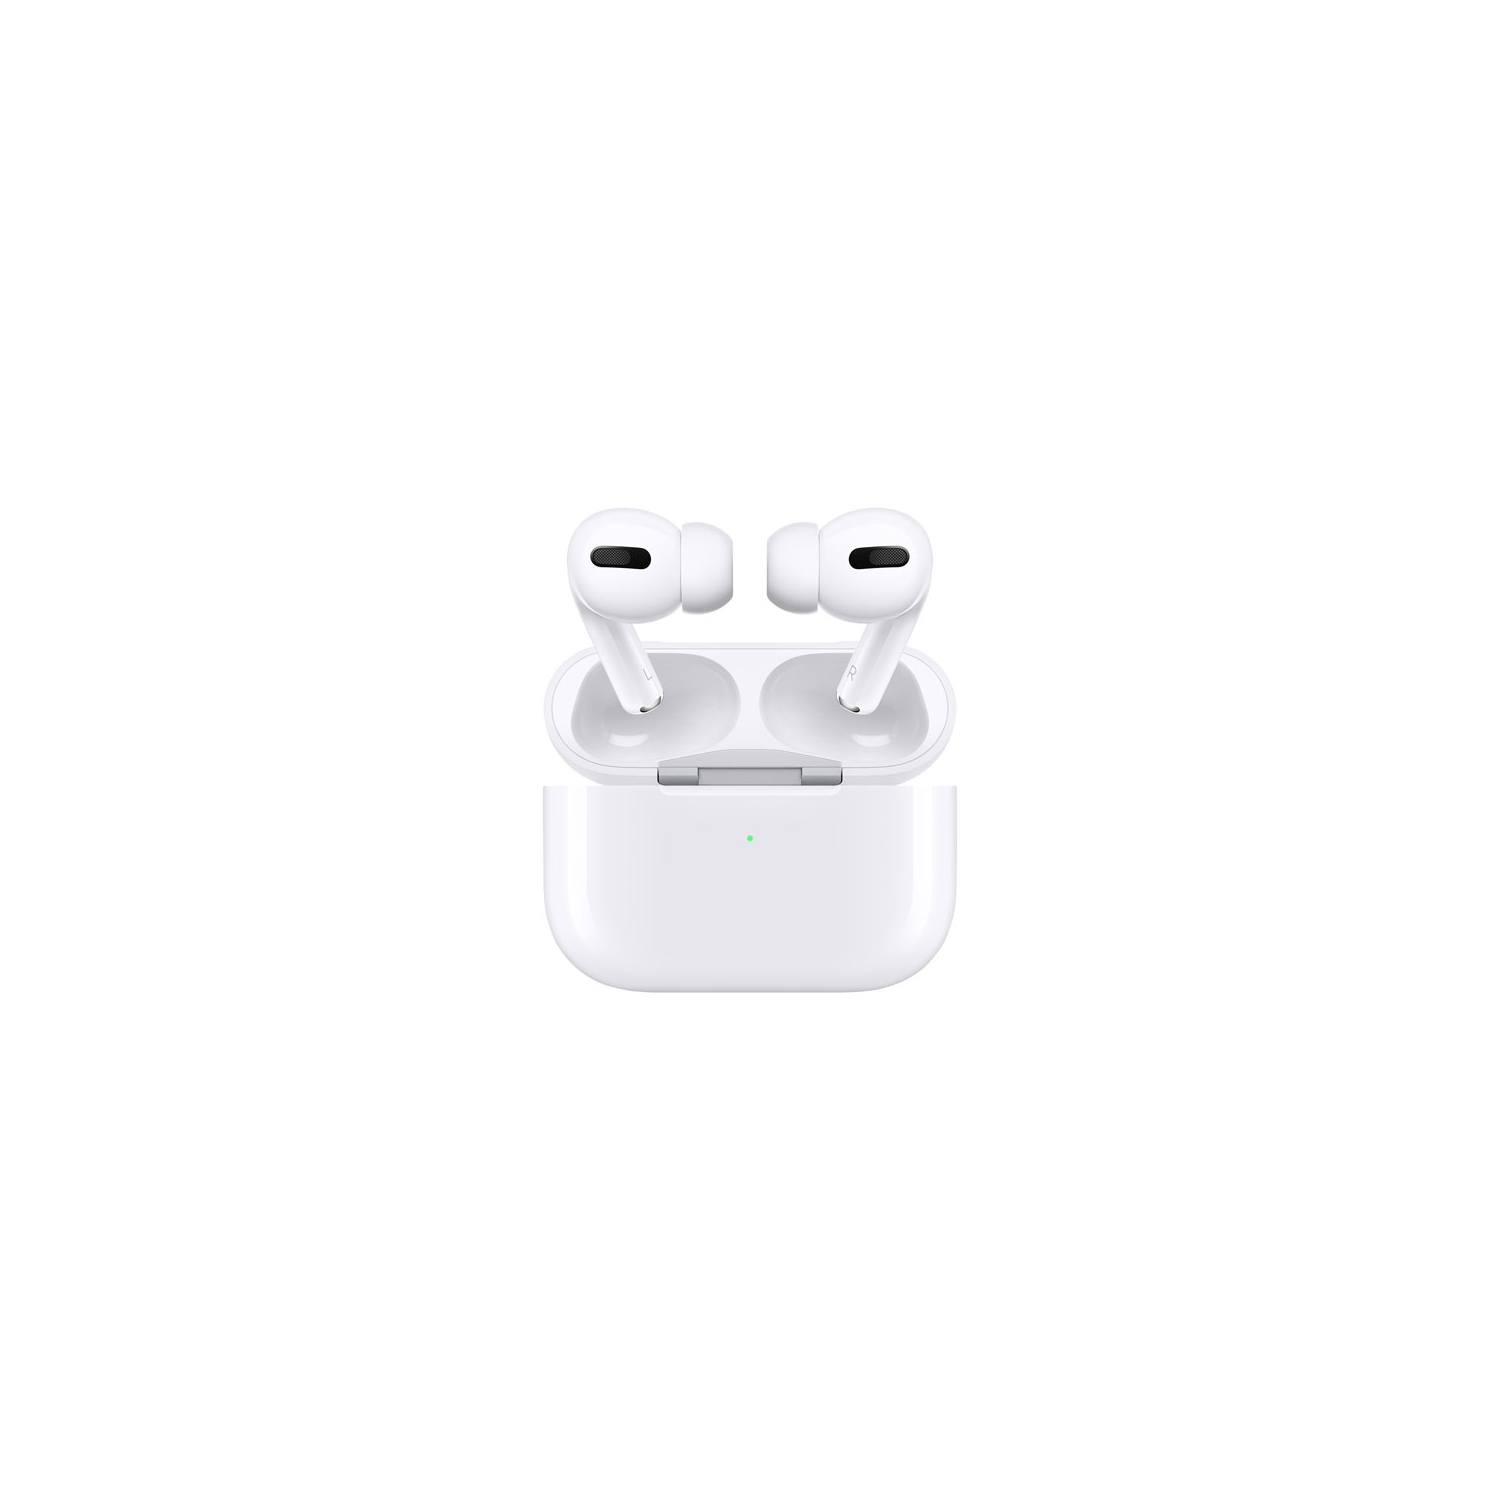 Refurbished (Good) - Apple AirPods Pro In-Ear Truly Wireless Headphones w/ Active Noise Cancelling (White)